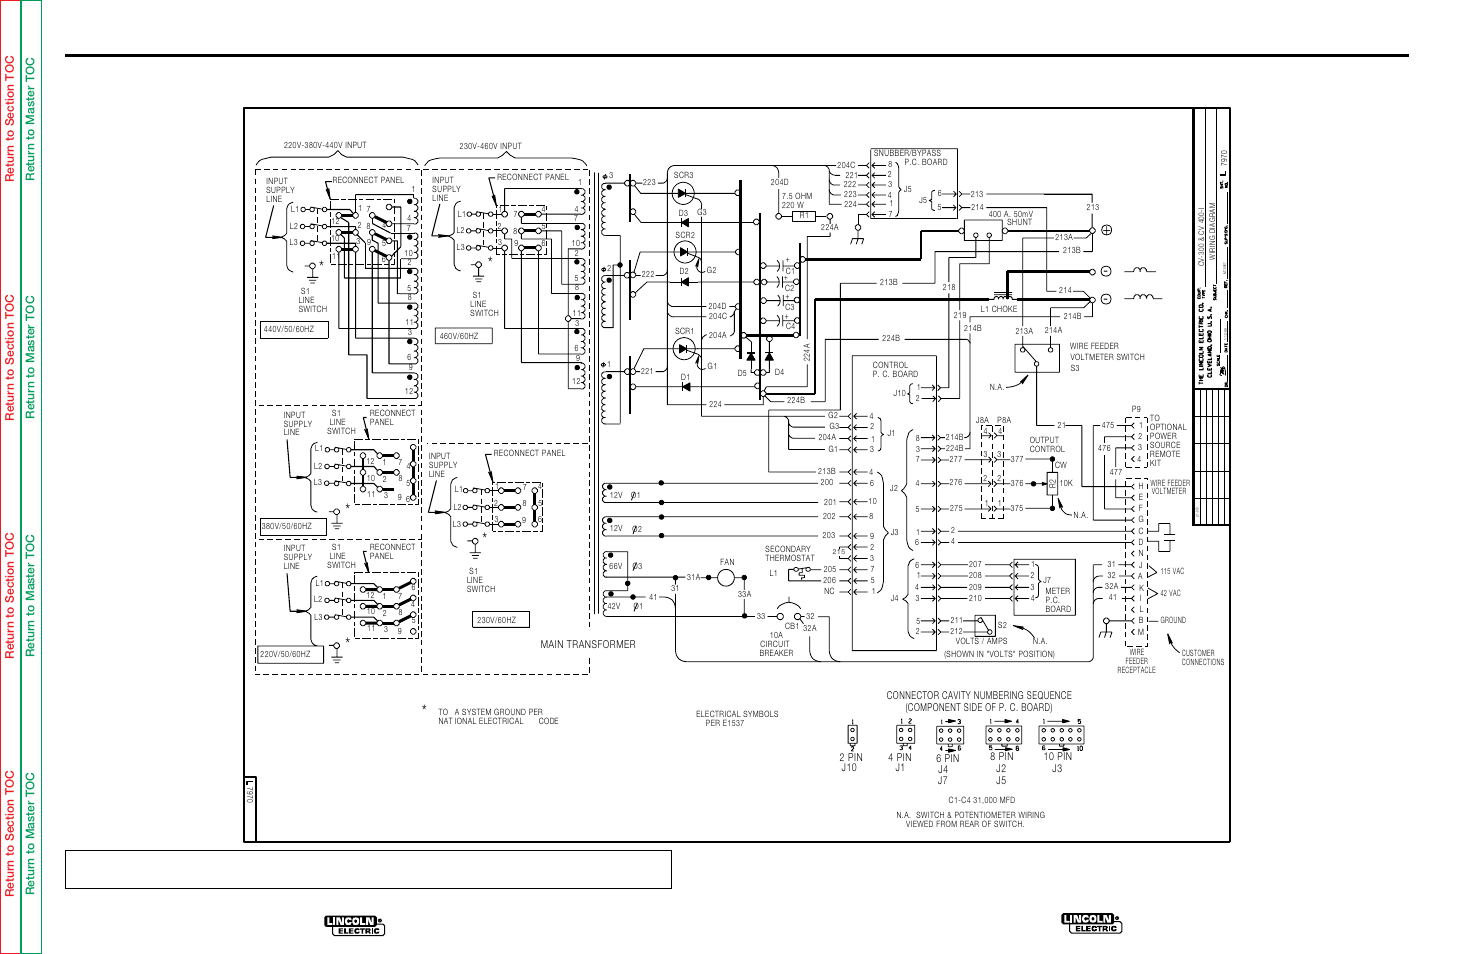 electrical diagrams  wiring diagram for code 9456